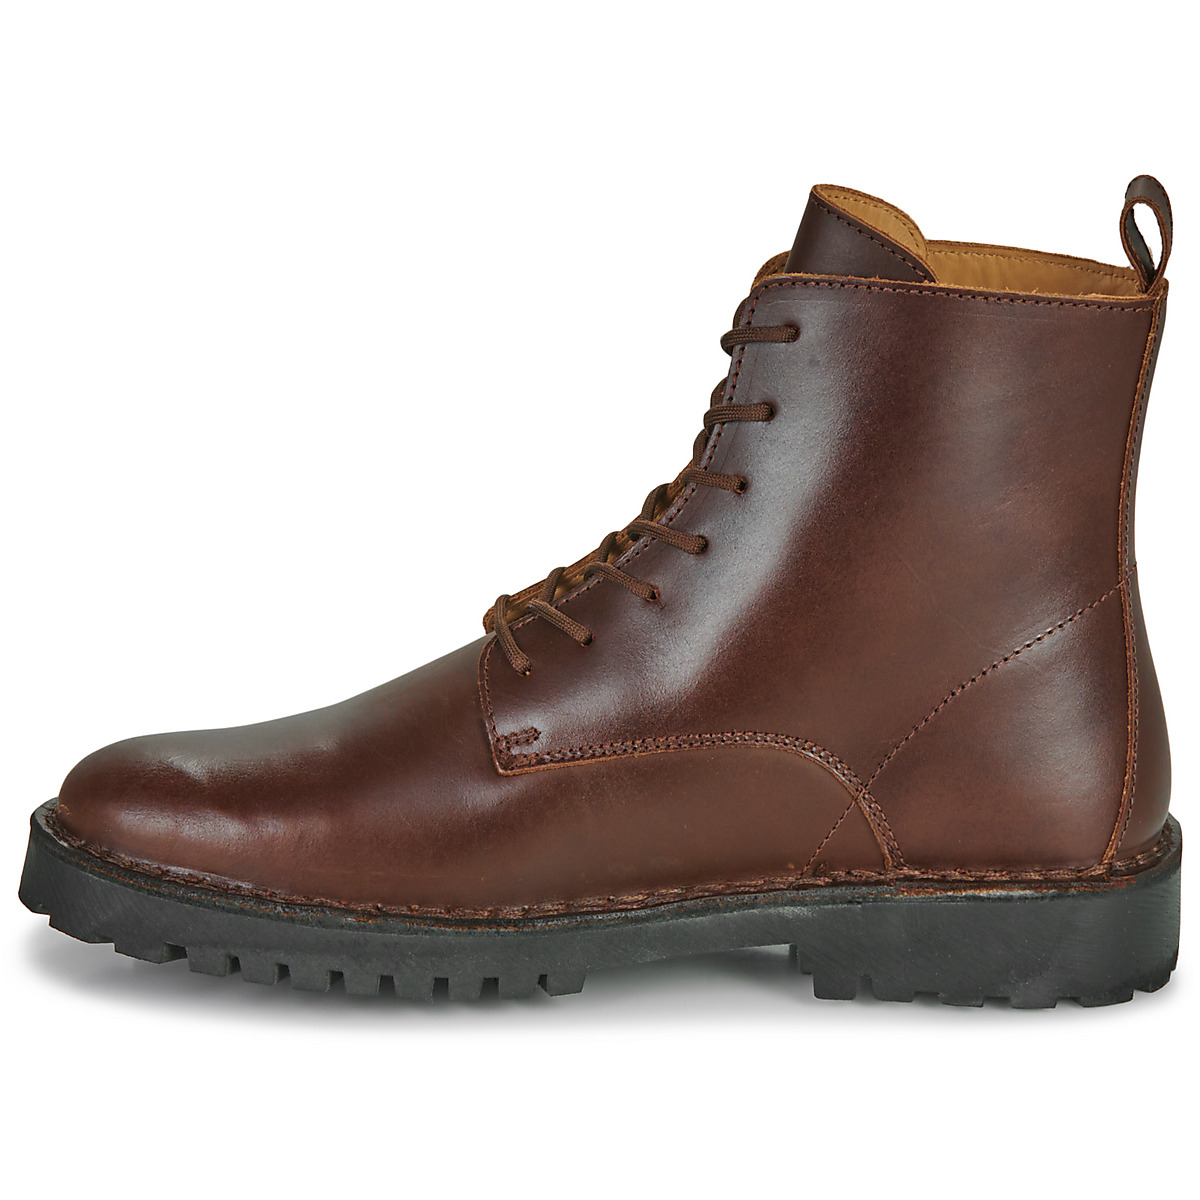 Selected Marron SLHRICKY LEATHER LACE-UP BOOT 2DlYVkp5